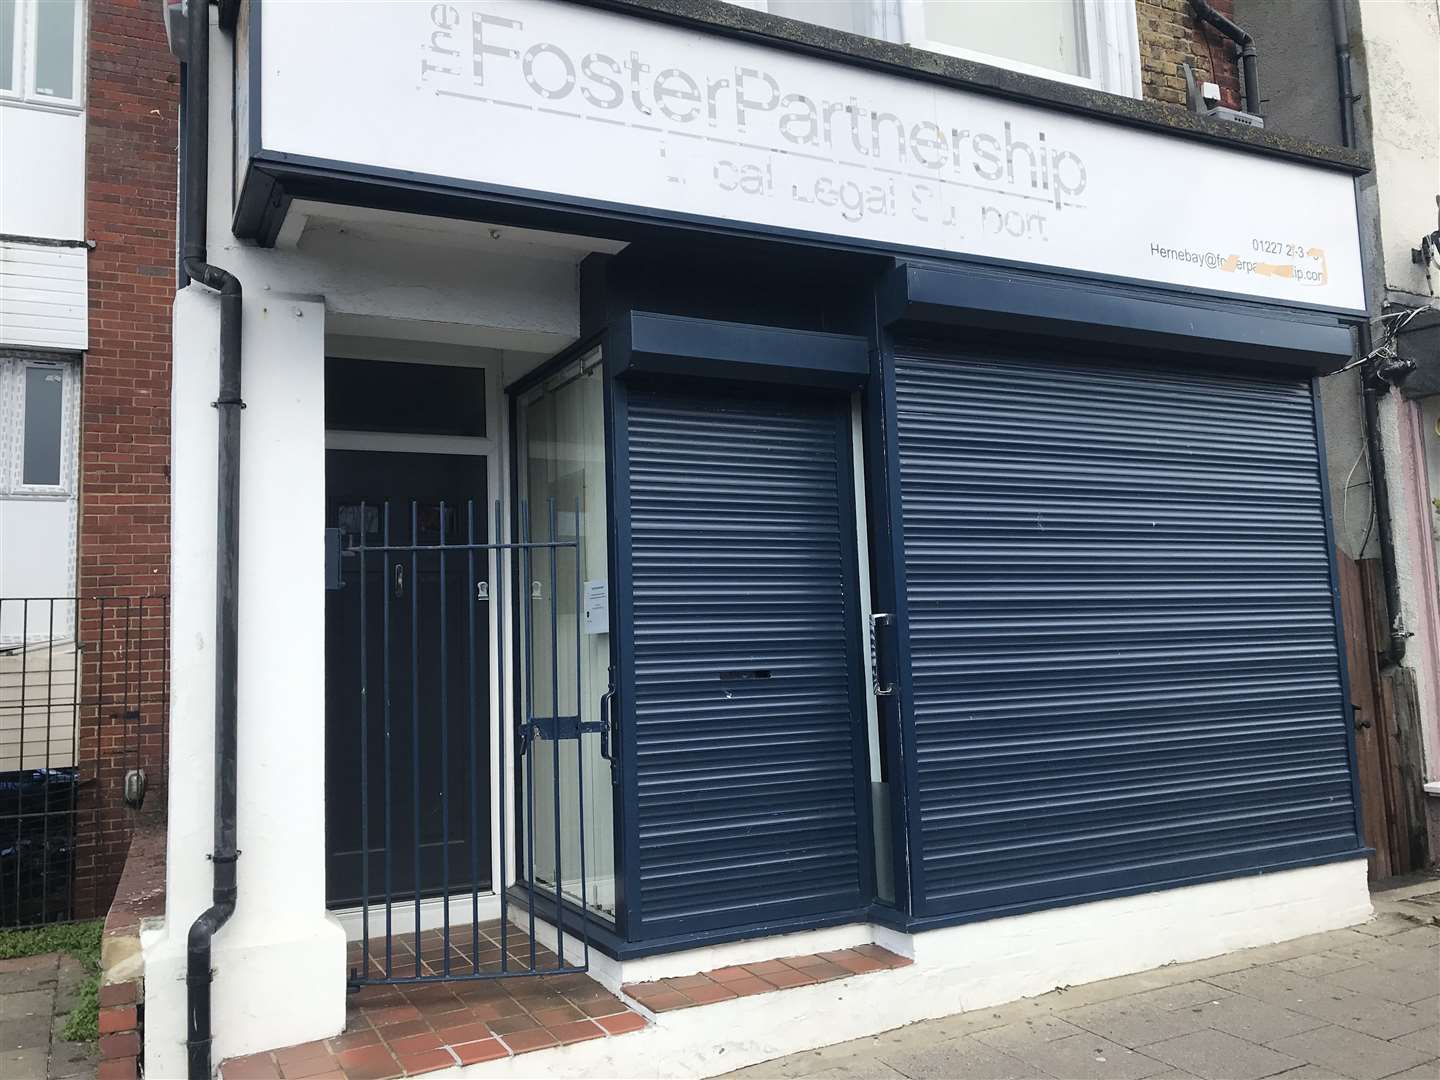 The Foster Partnership office in Herne Bay High Street (19634372)